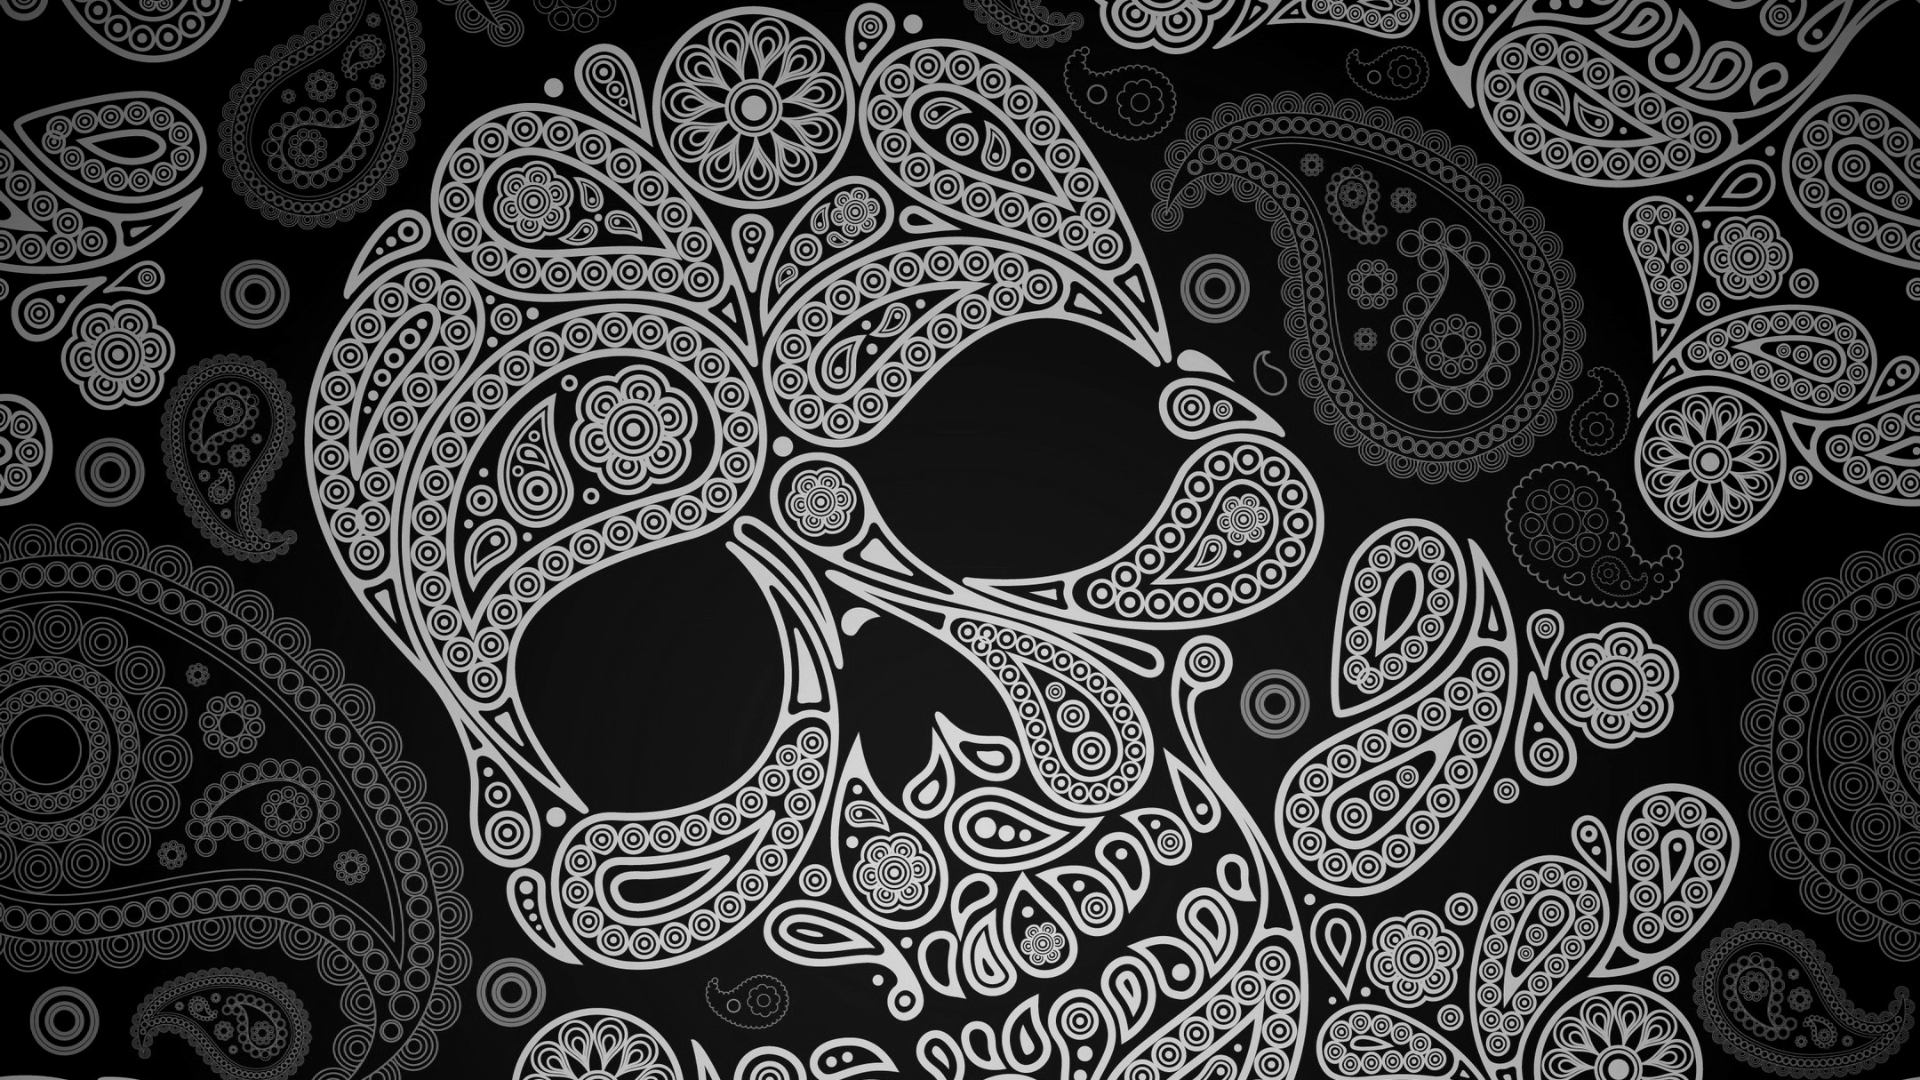 Dress Up and Celebrate the Day of the Dead with Colorful Sugar Skulls